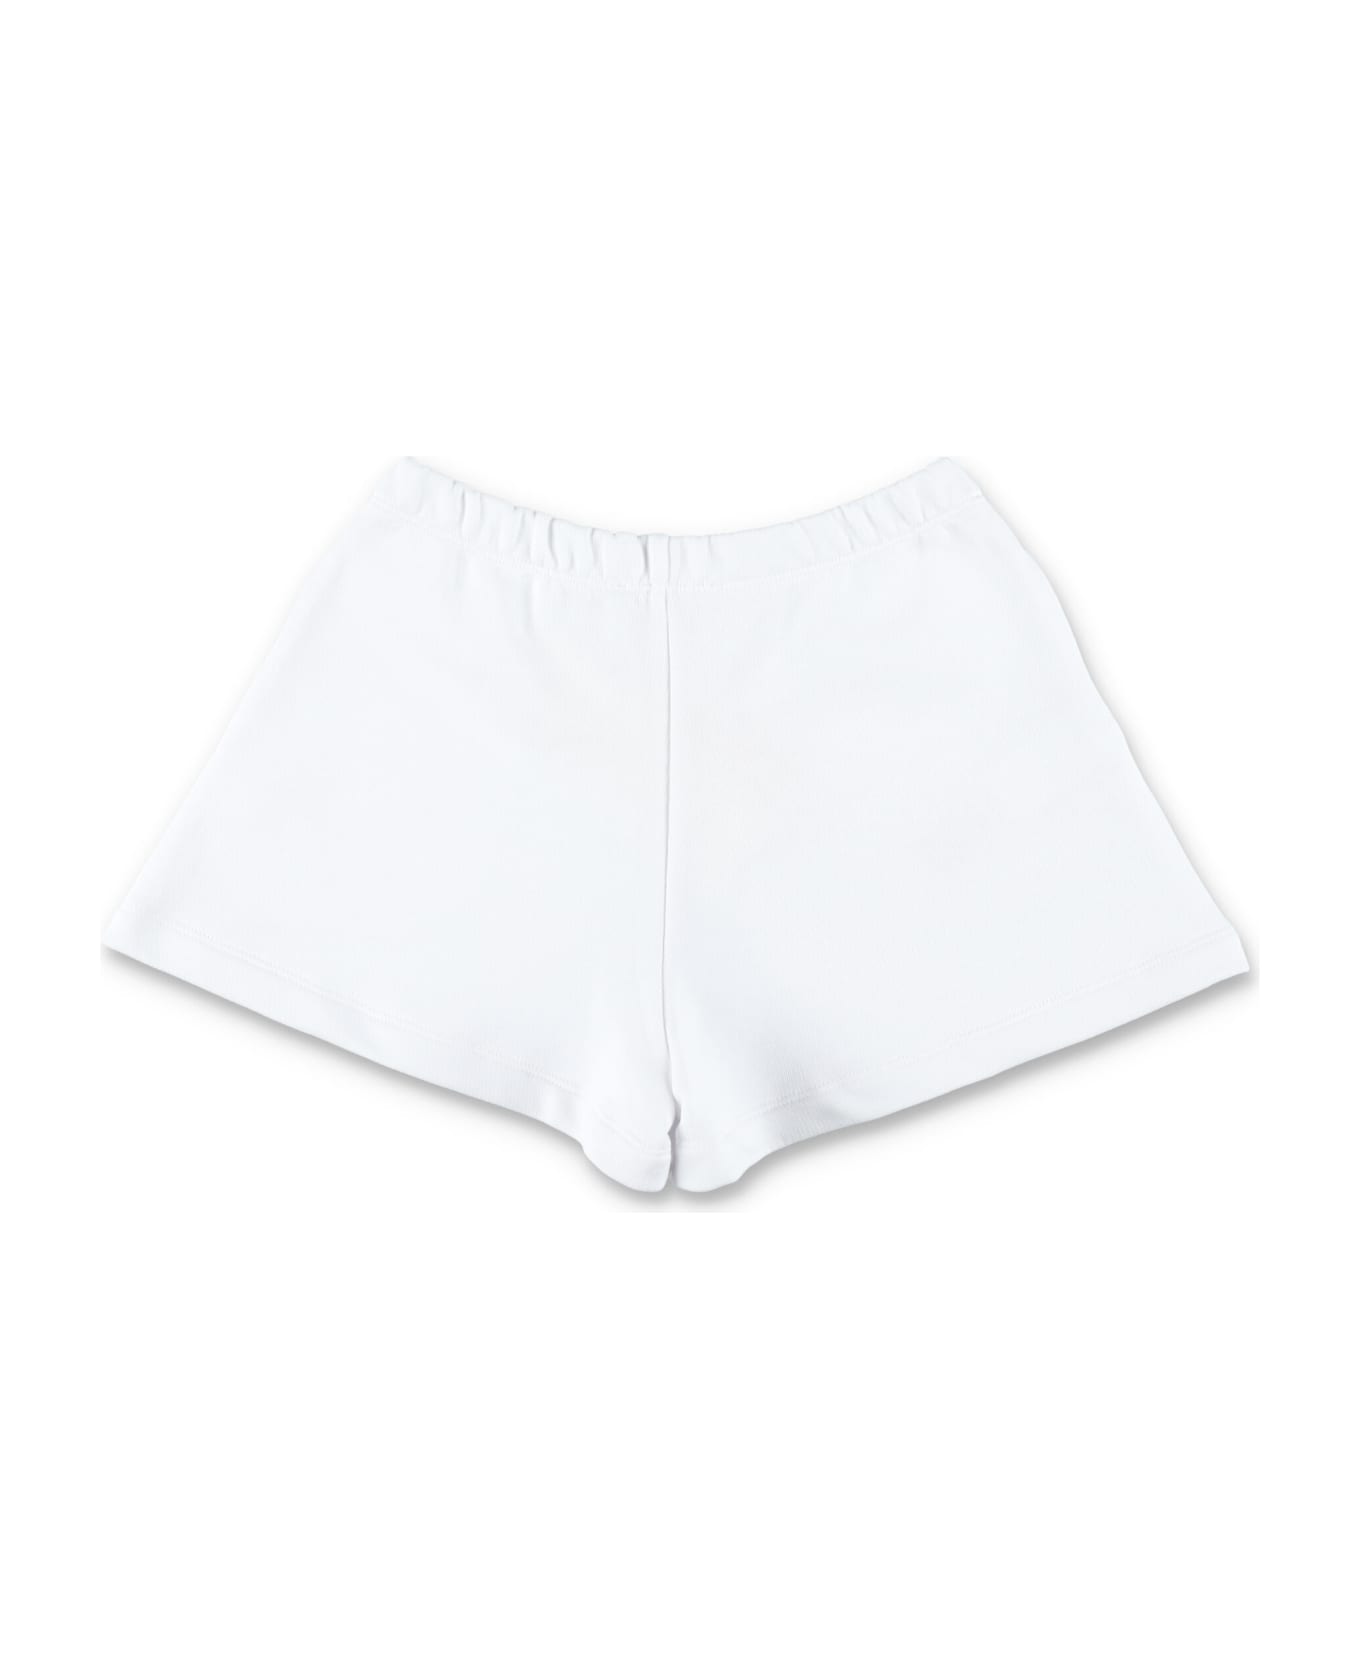 Marni Fleece Shorts With Floral Graphics - WHITE